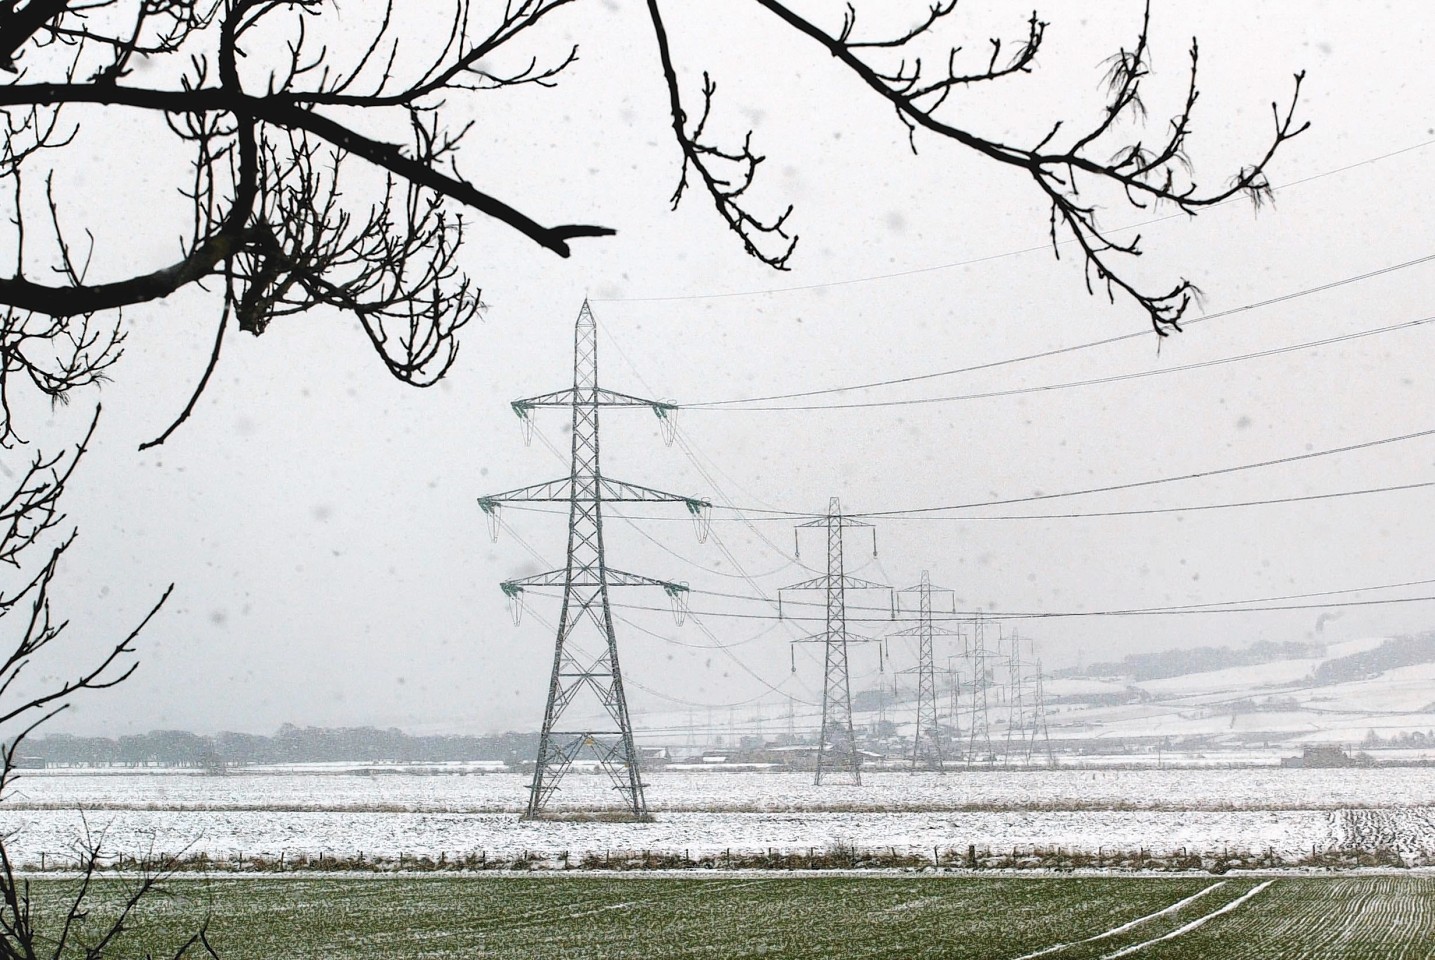 Shet is planning a new line of pylons across the north